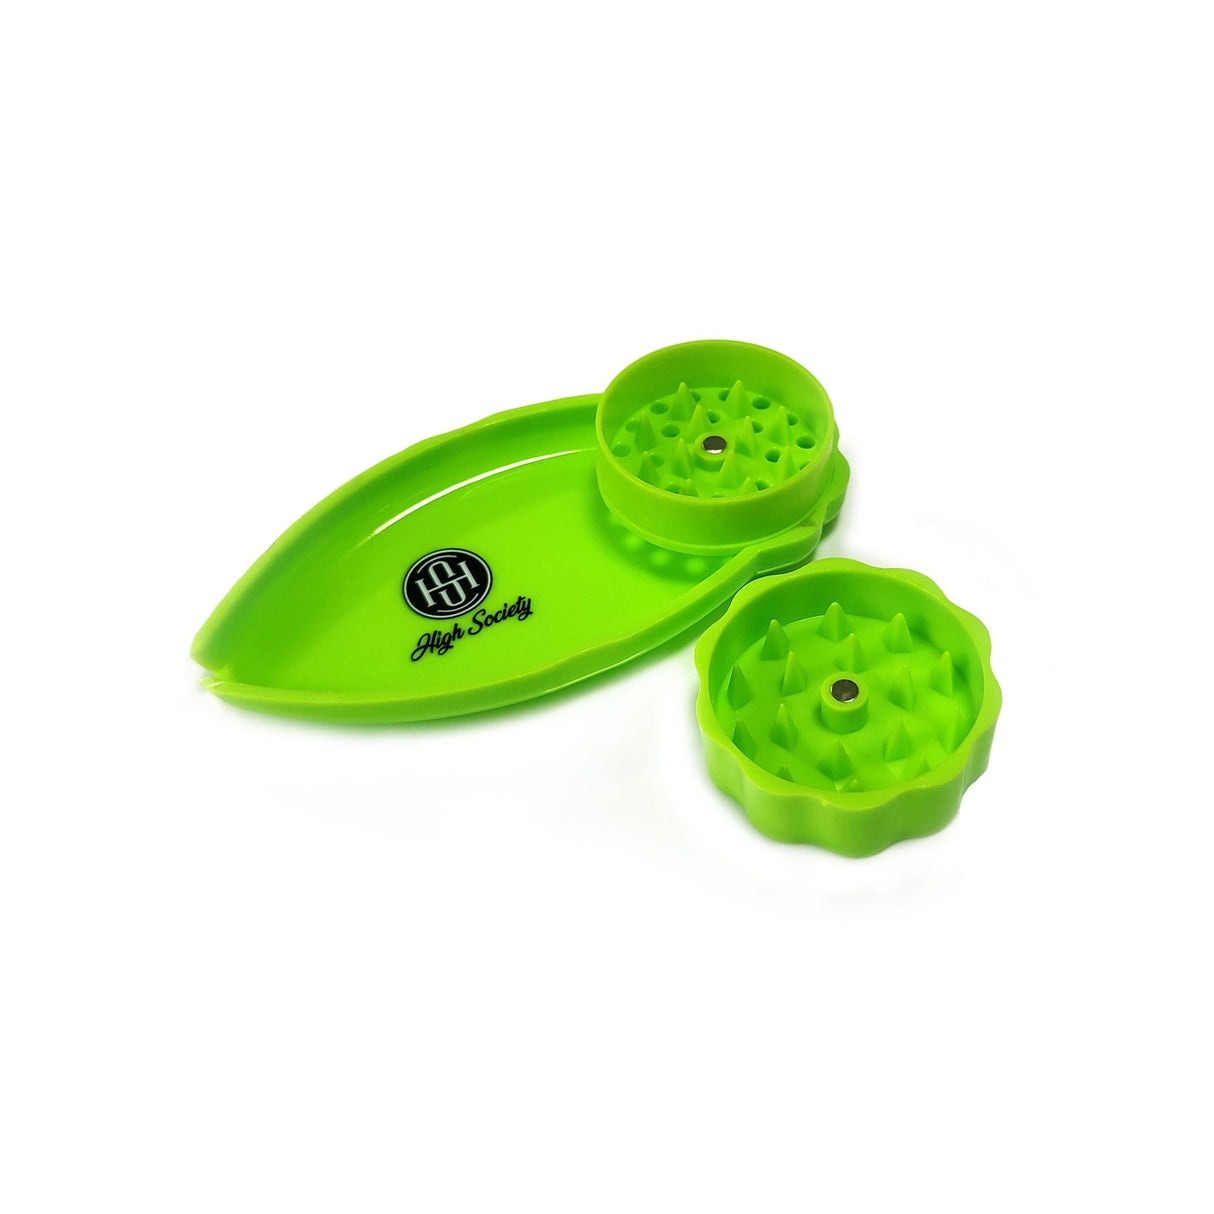 High Society Mini Rolling Tray Grinder Combo in Neon Green, Top View, Compact Design